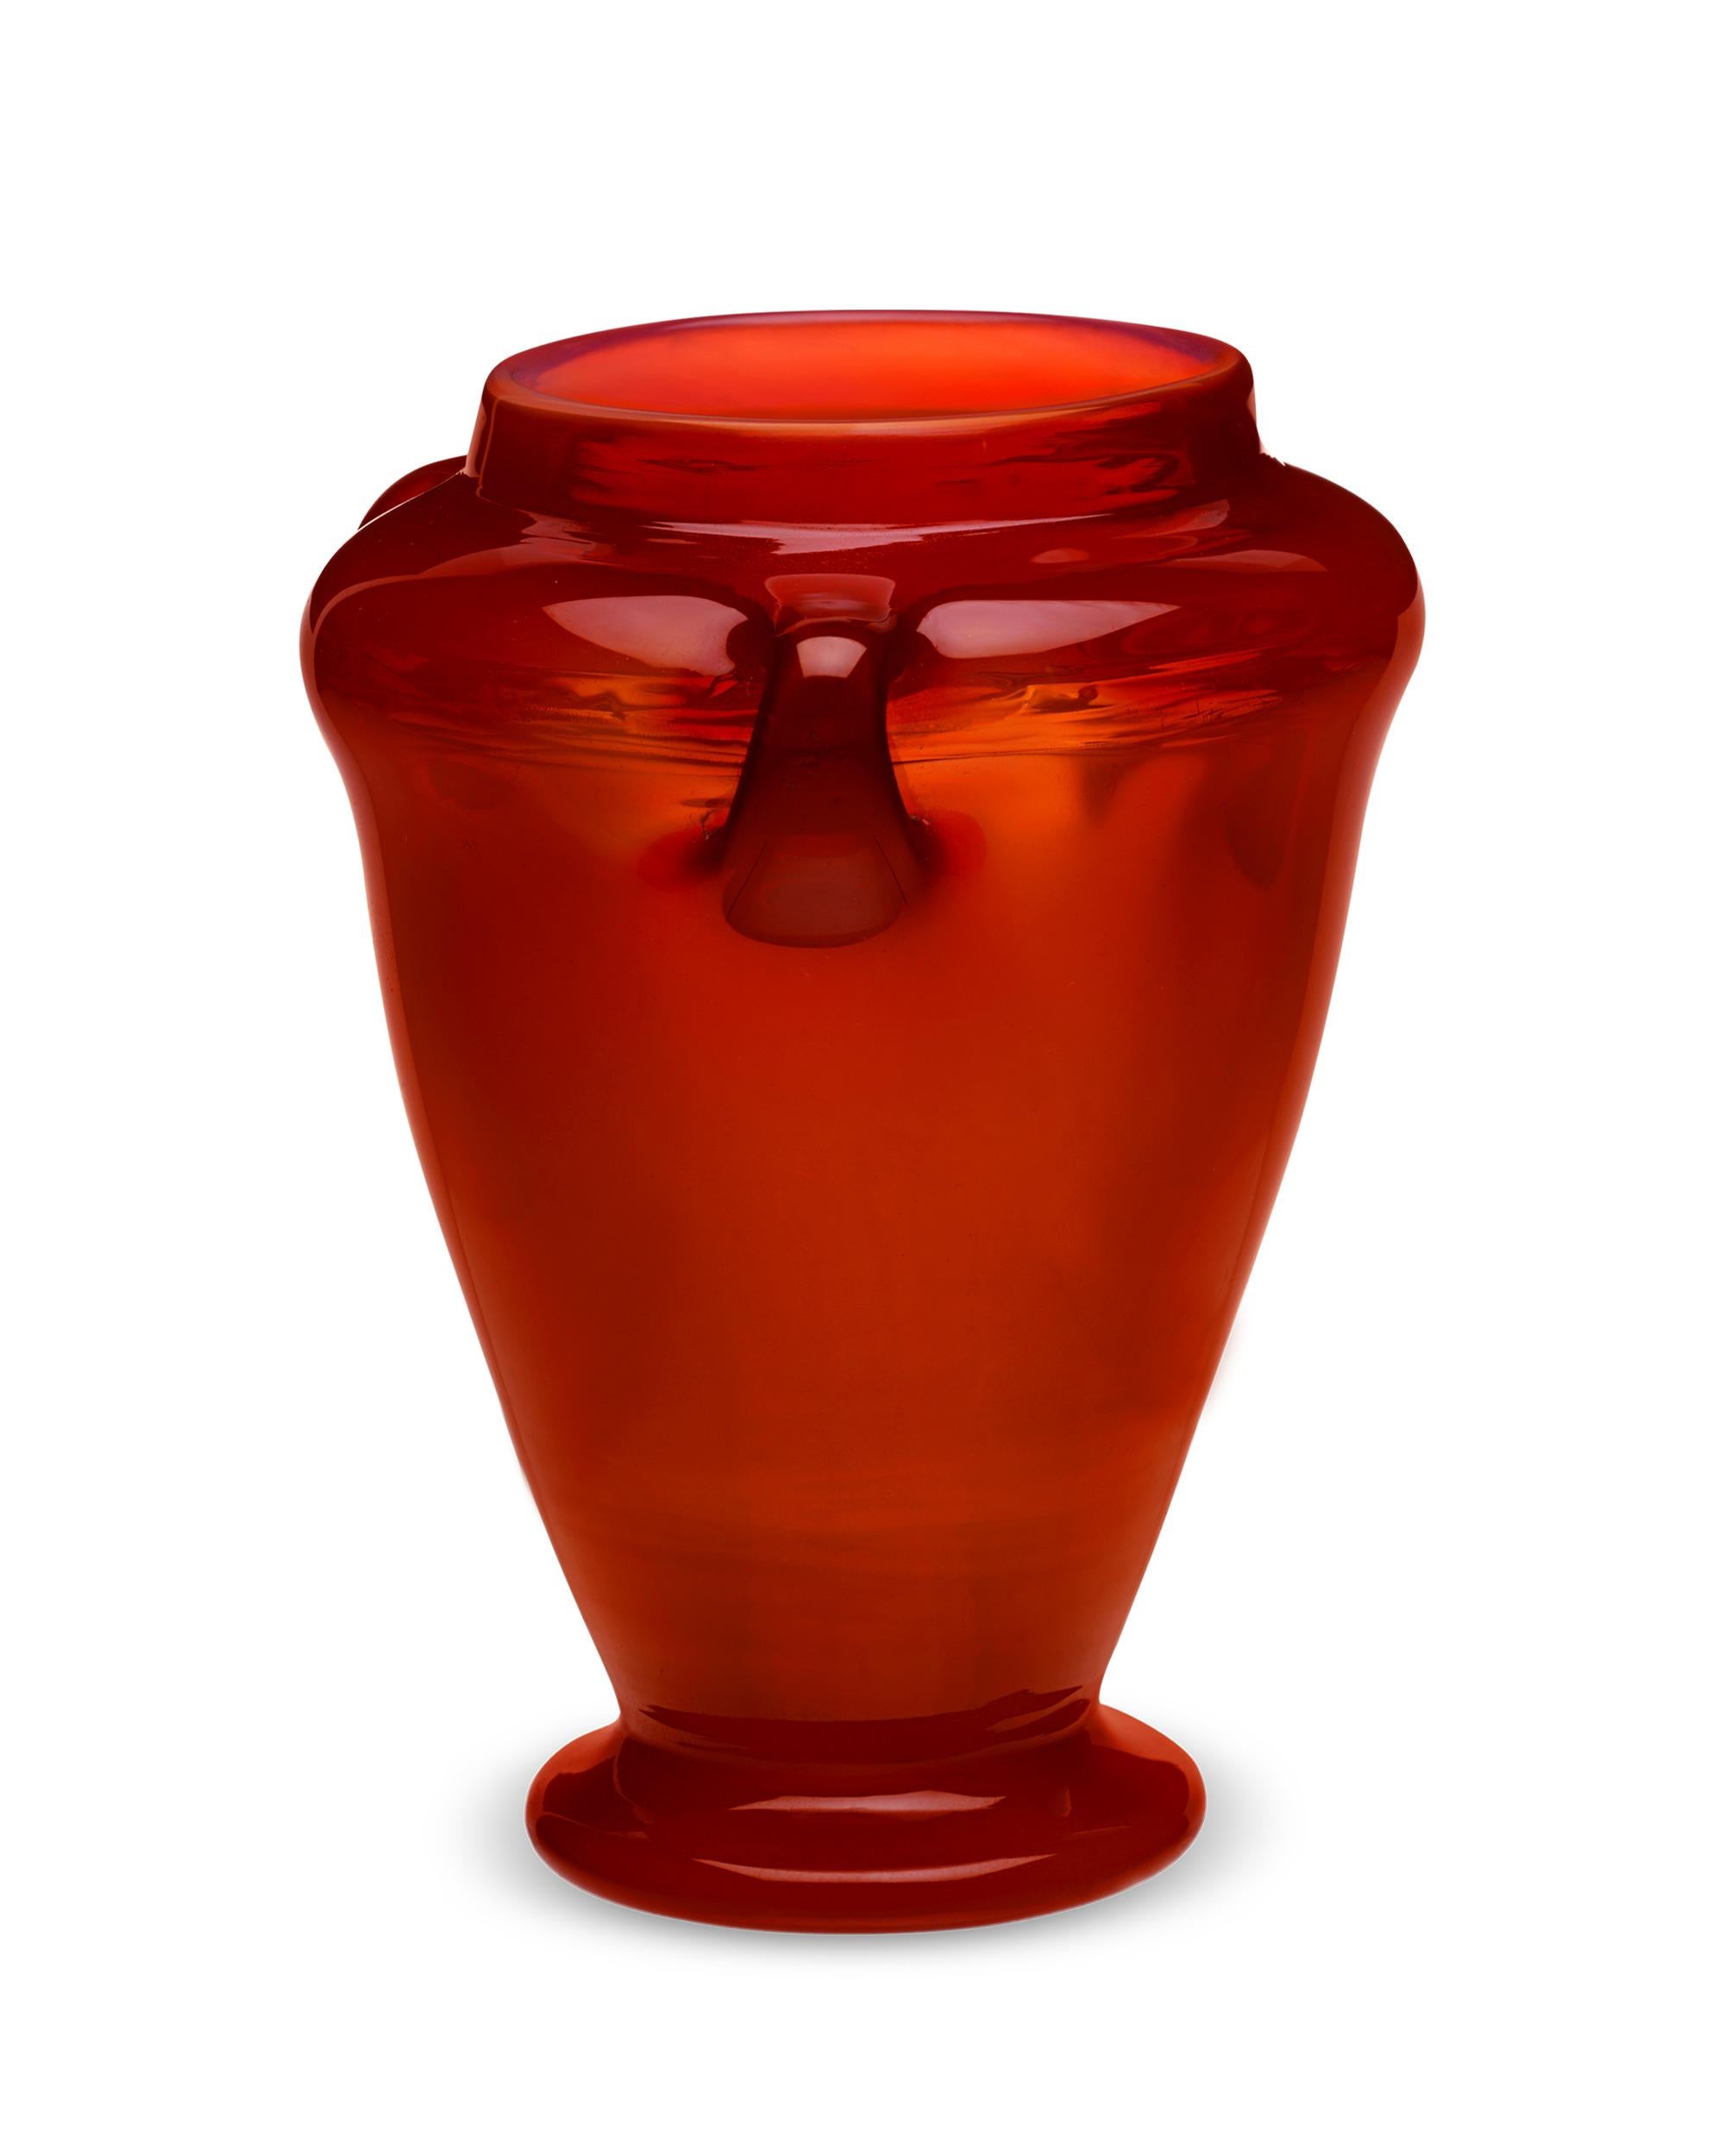 Crafted from a deep and vibrant red glass, this luminescent Favrile vase was made by the legendary Tiffany Studios. Of all the Favrile glass hues, red is the most elusive and difficult to find due to its high cost of production. A red Favrile vase